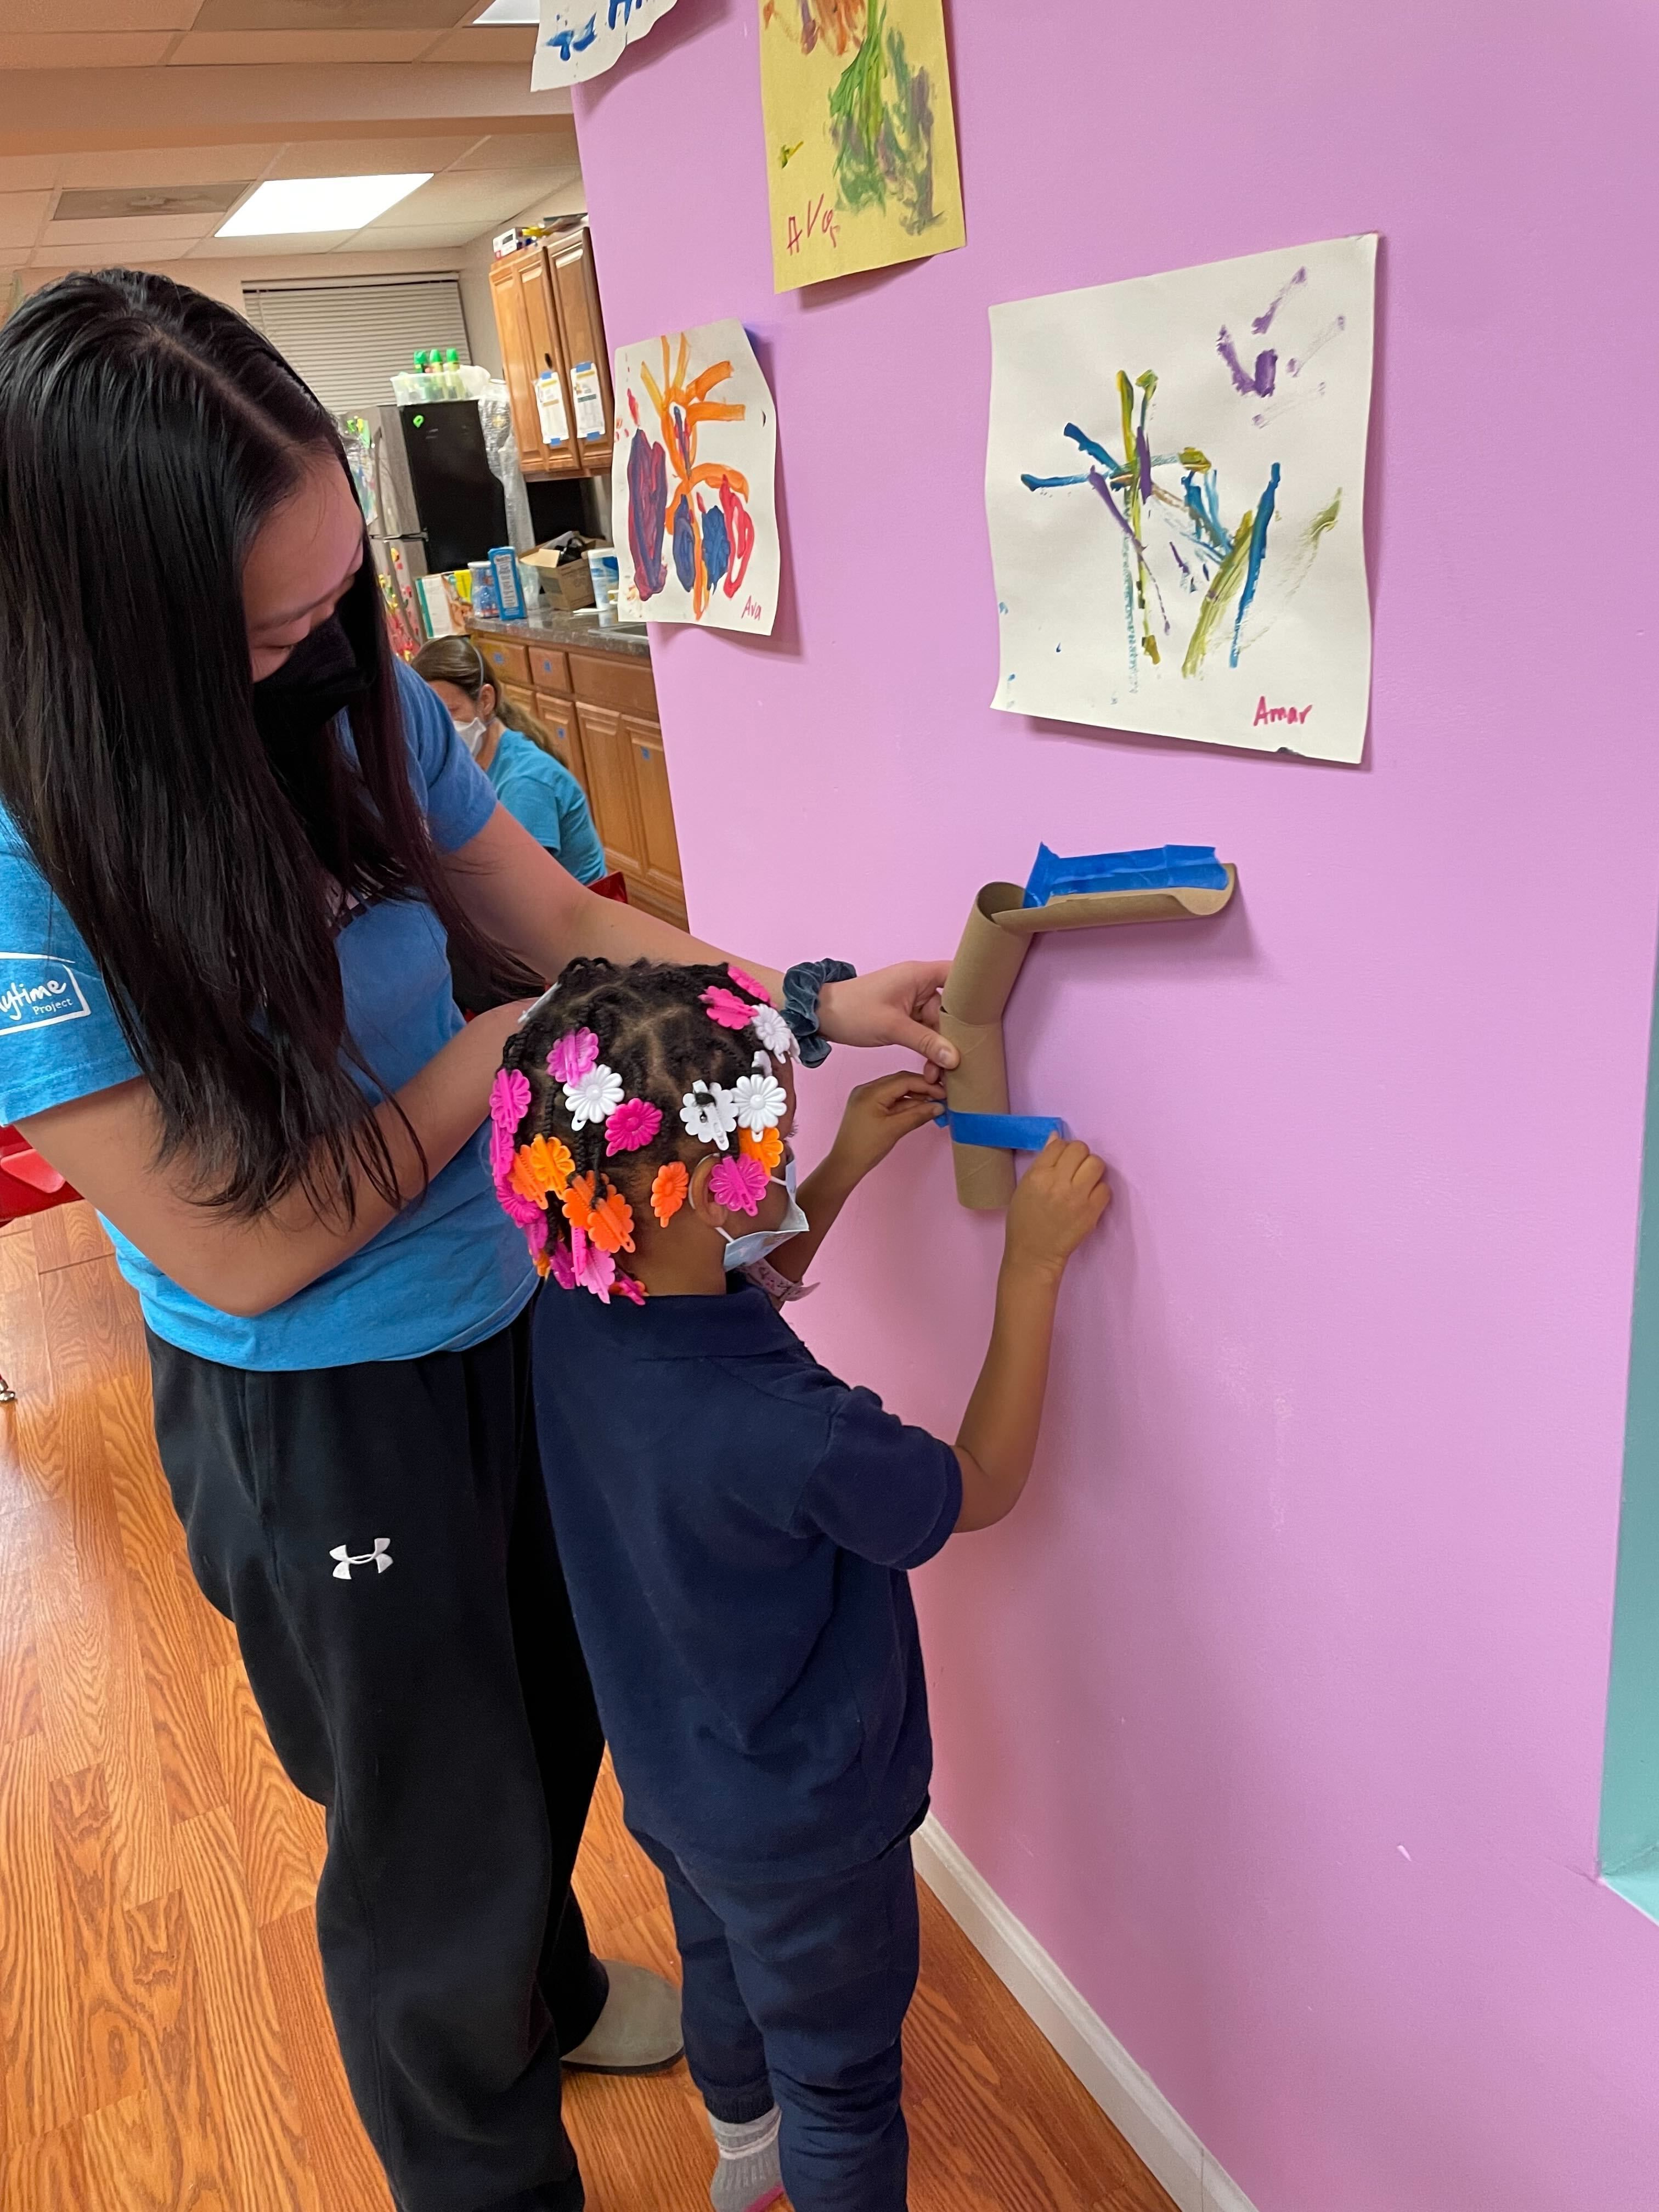 A Playtime volunteer and child work together to complete an activity.